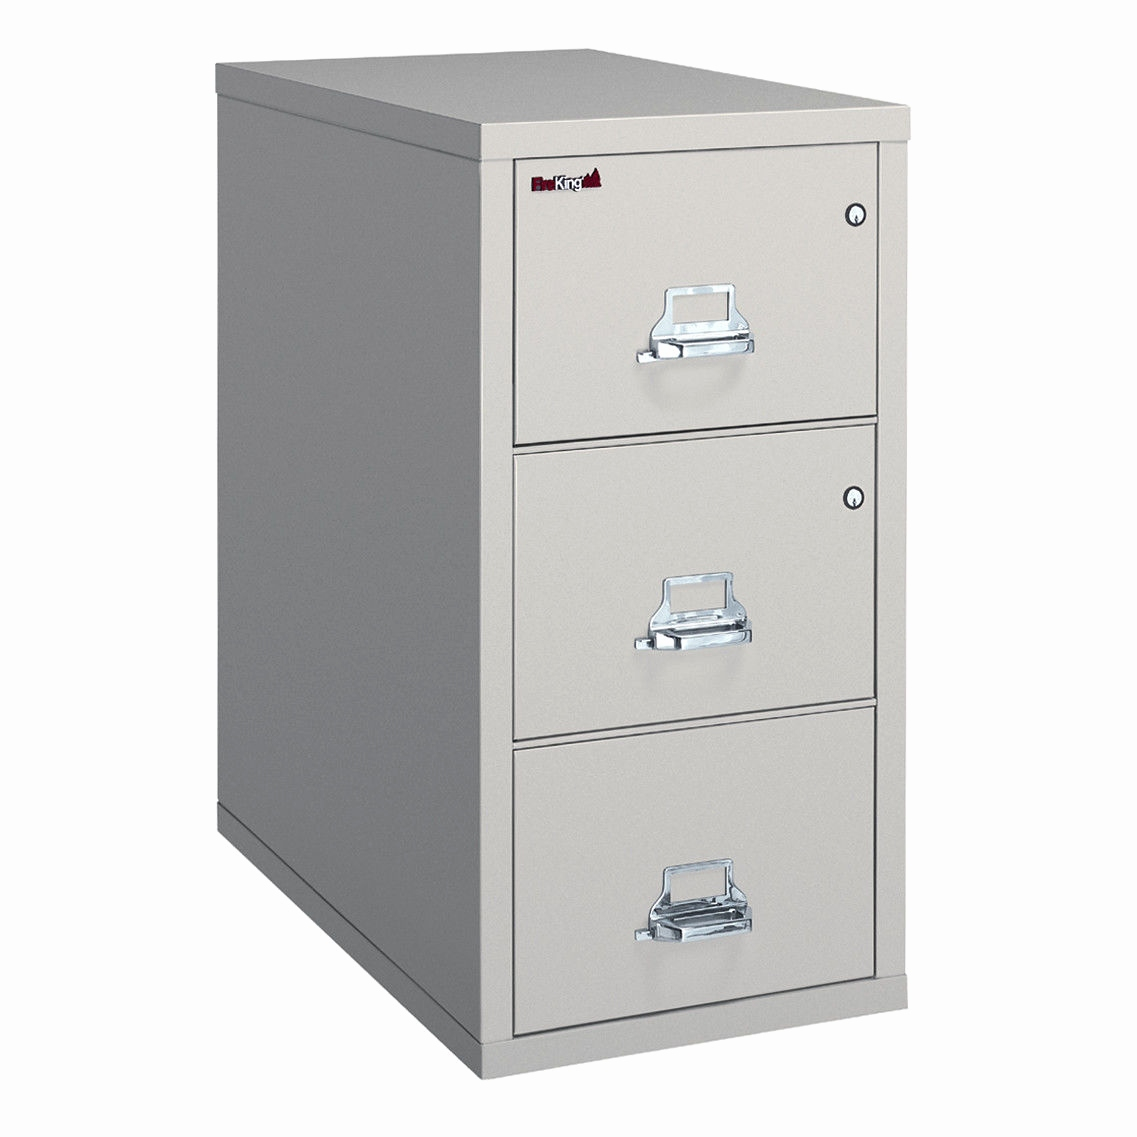 Officemax File Cabinets Officemax 4 Drawer File Cabinet Imanisr Com with regard to measurements 1137 X 1137